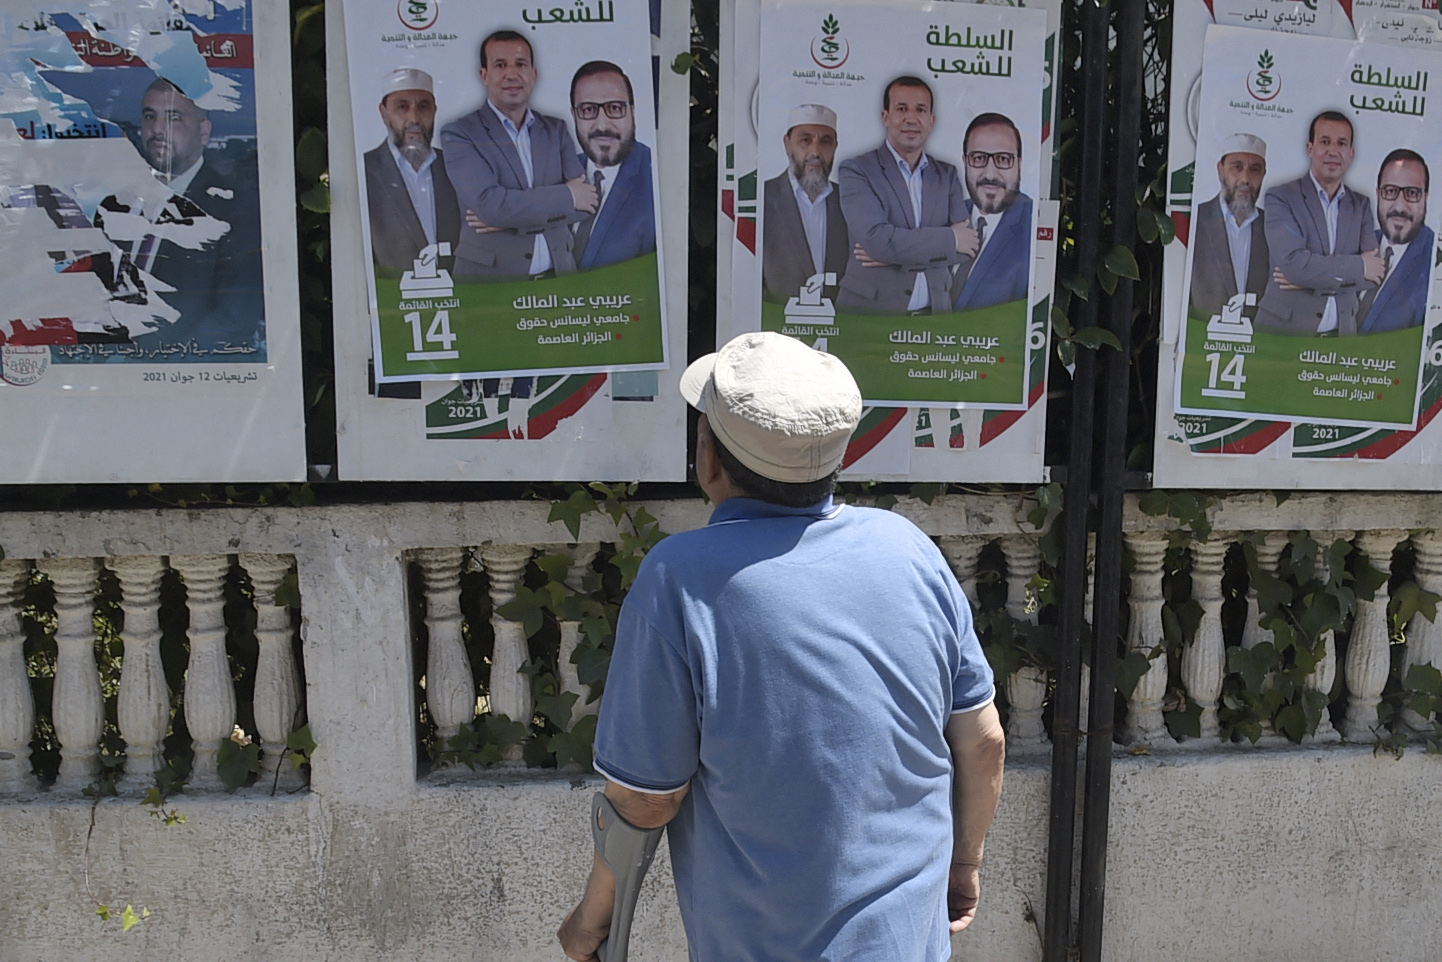 Algeria holds first Parliament election since protest wave in 2019. But many stayed away.